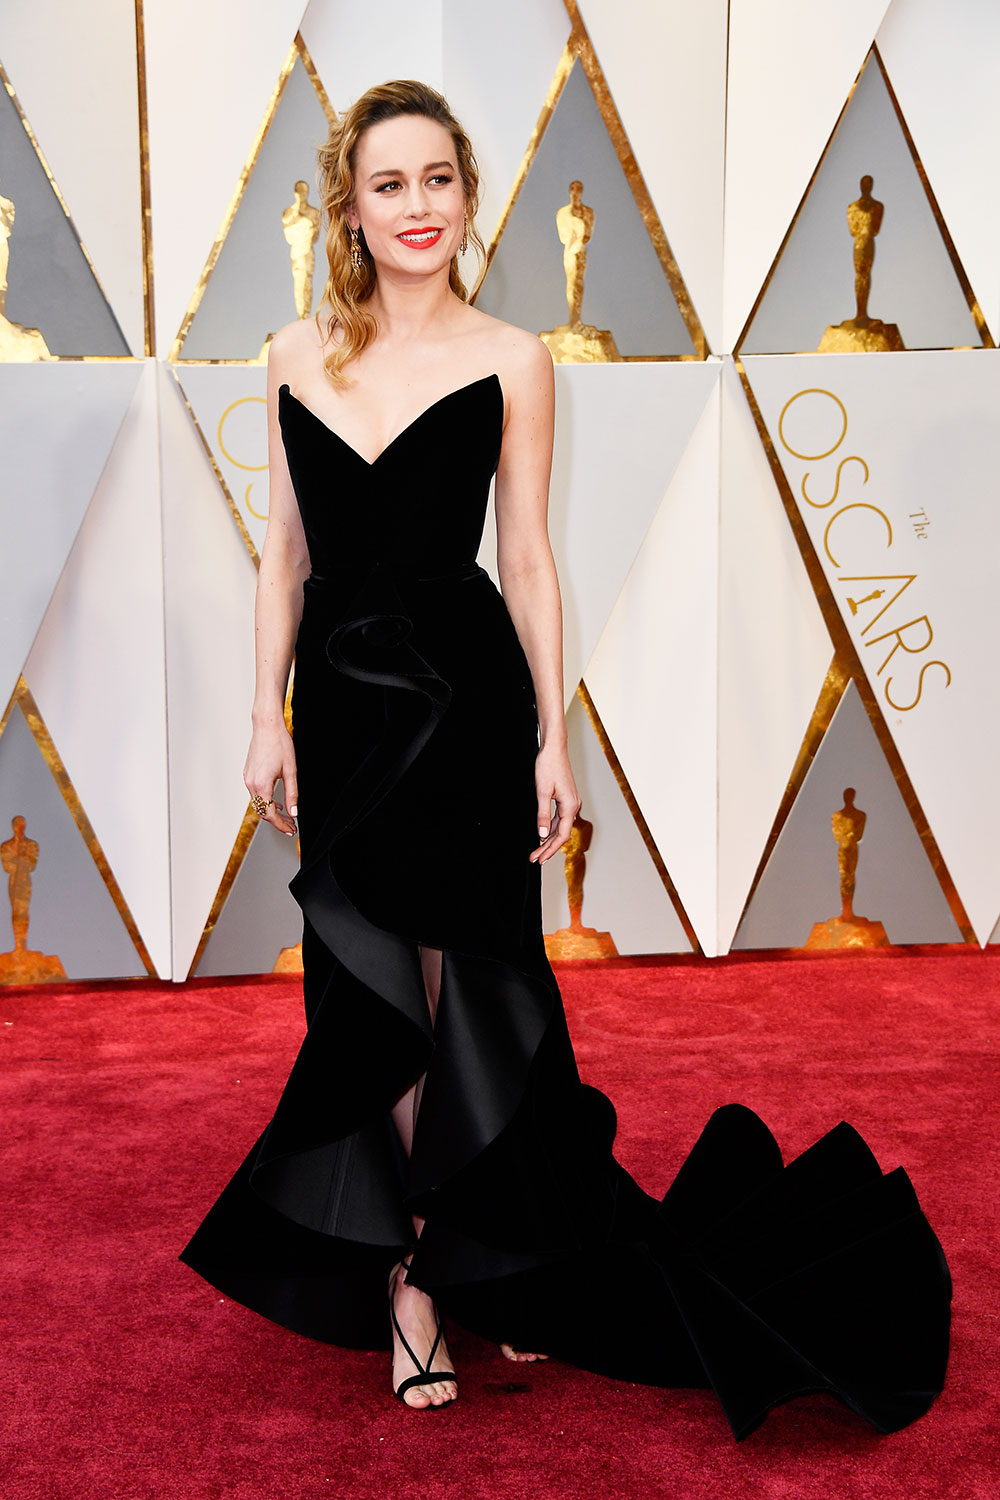 In an Oscar de la Renta gown Brie Larson was a perfectly ruffled mix of sophistication and fun.